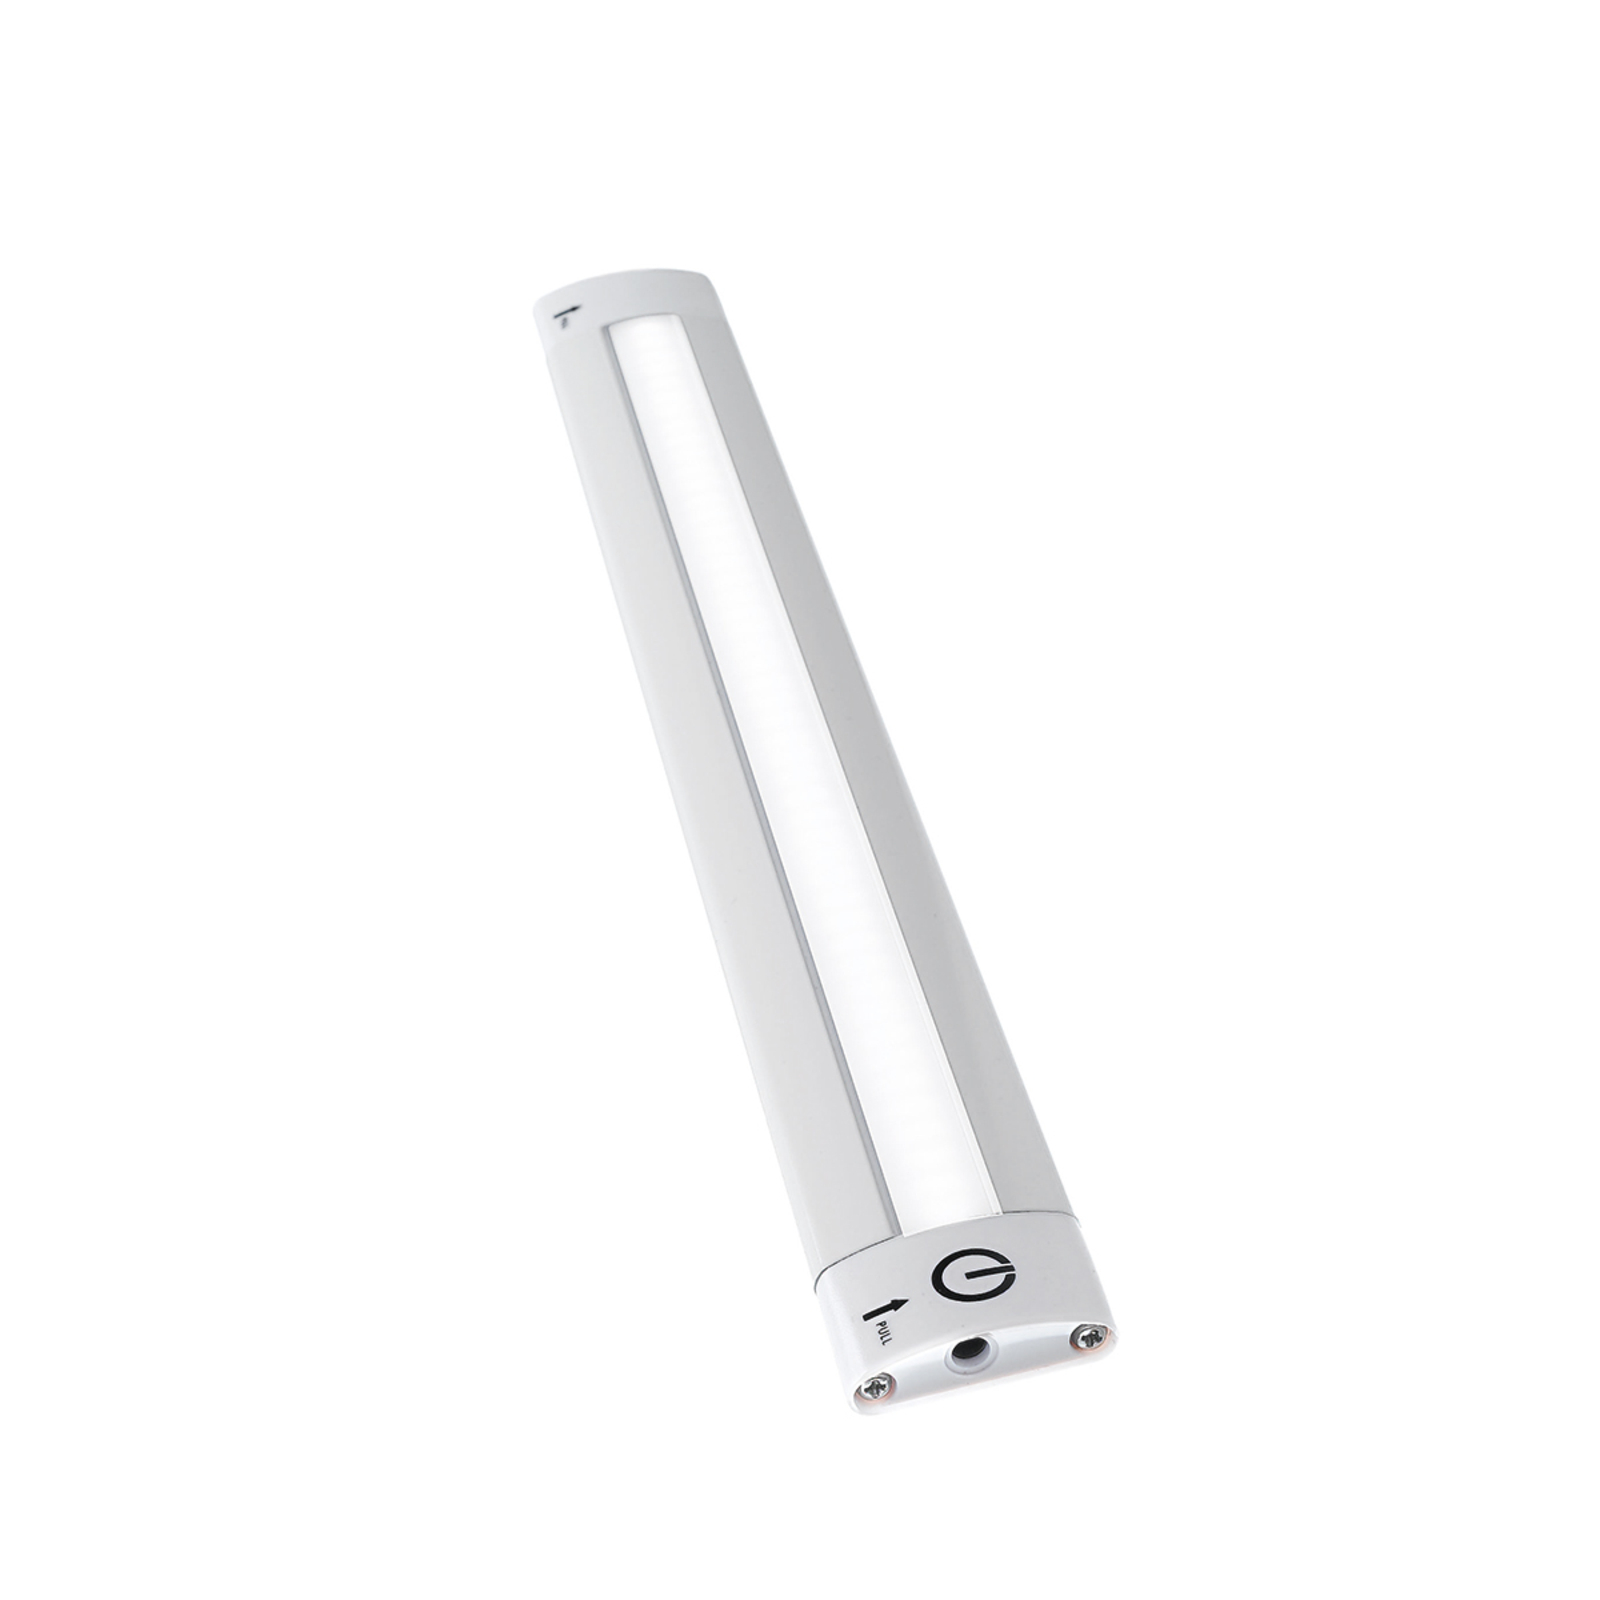 Applique sous meuble LED 5W Galway 6690 TD